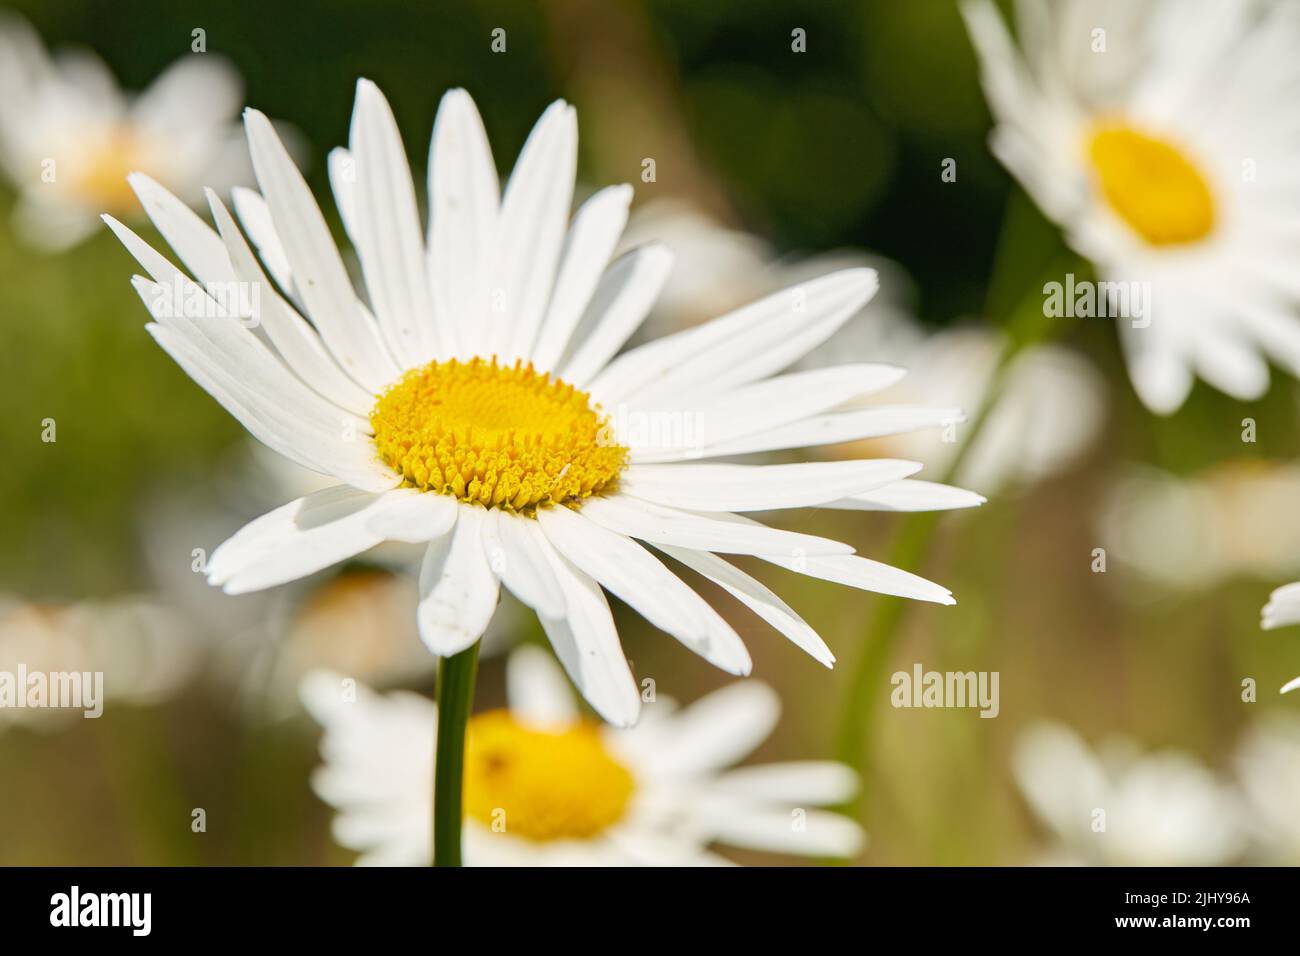 Daisy flowers growing in a field or botanical garden on a sunny day outdoors. Shasta or max chrysanthemum daisies from the asteraceae species with Stock Photo